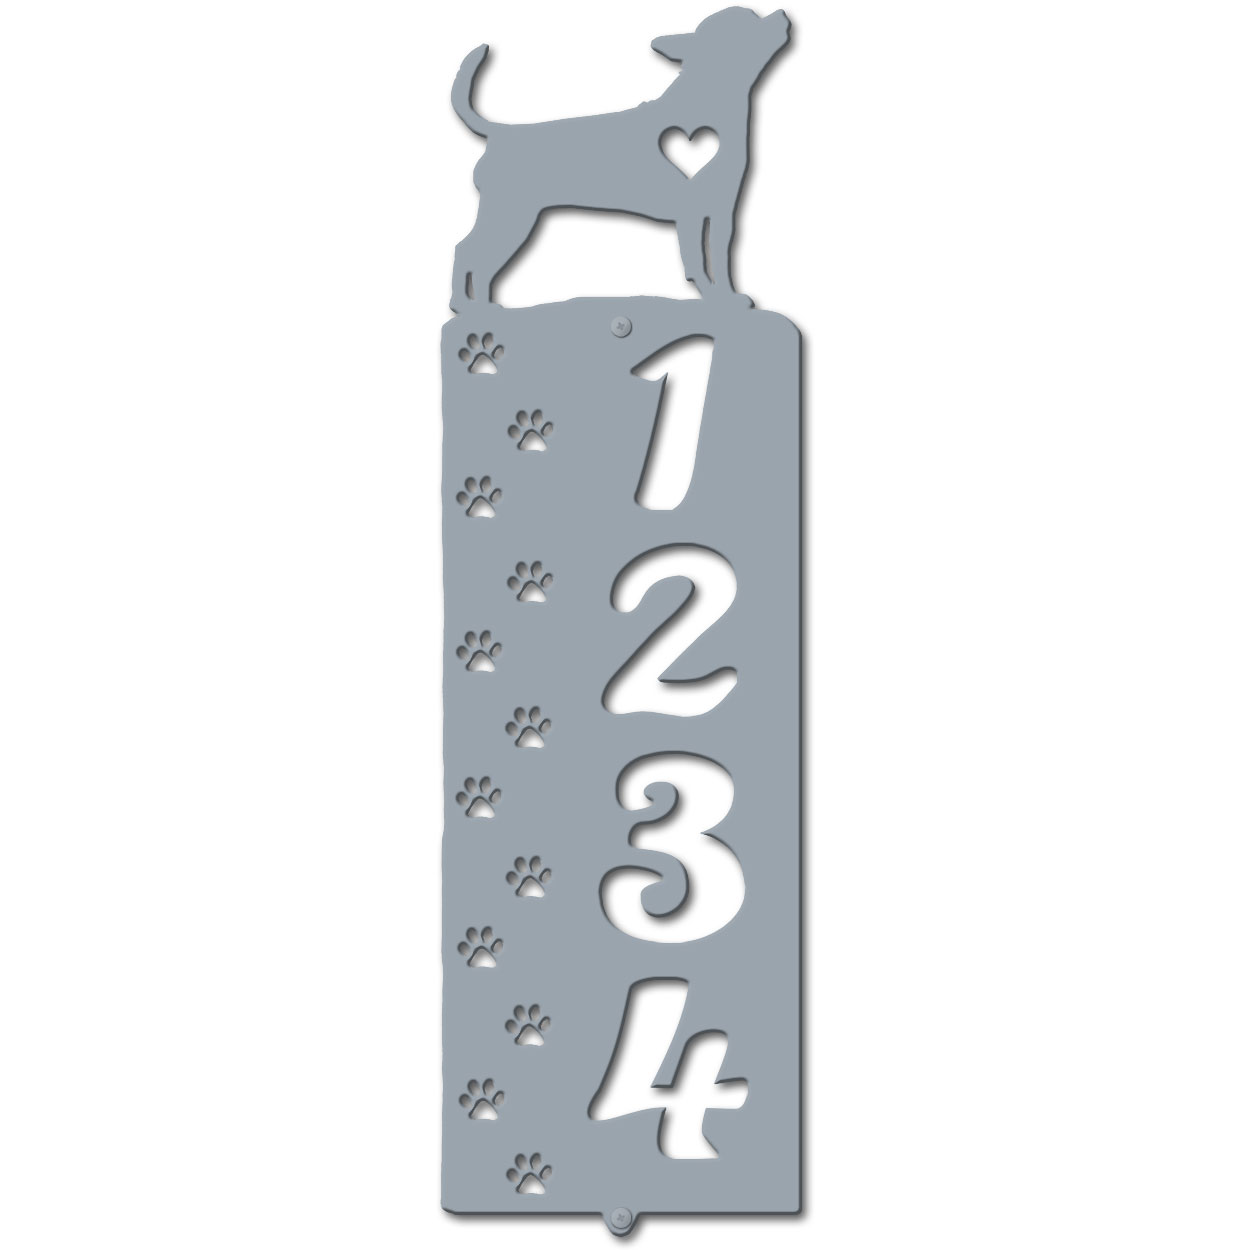 636174 - Chihuahua Cut Outs Four Digit Address Number Plaque